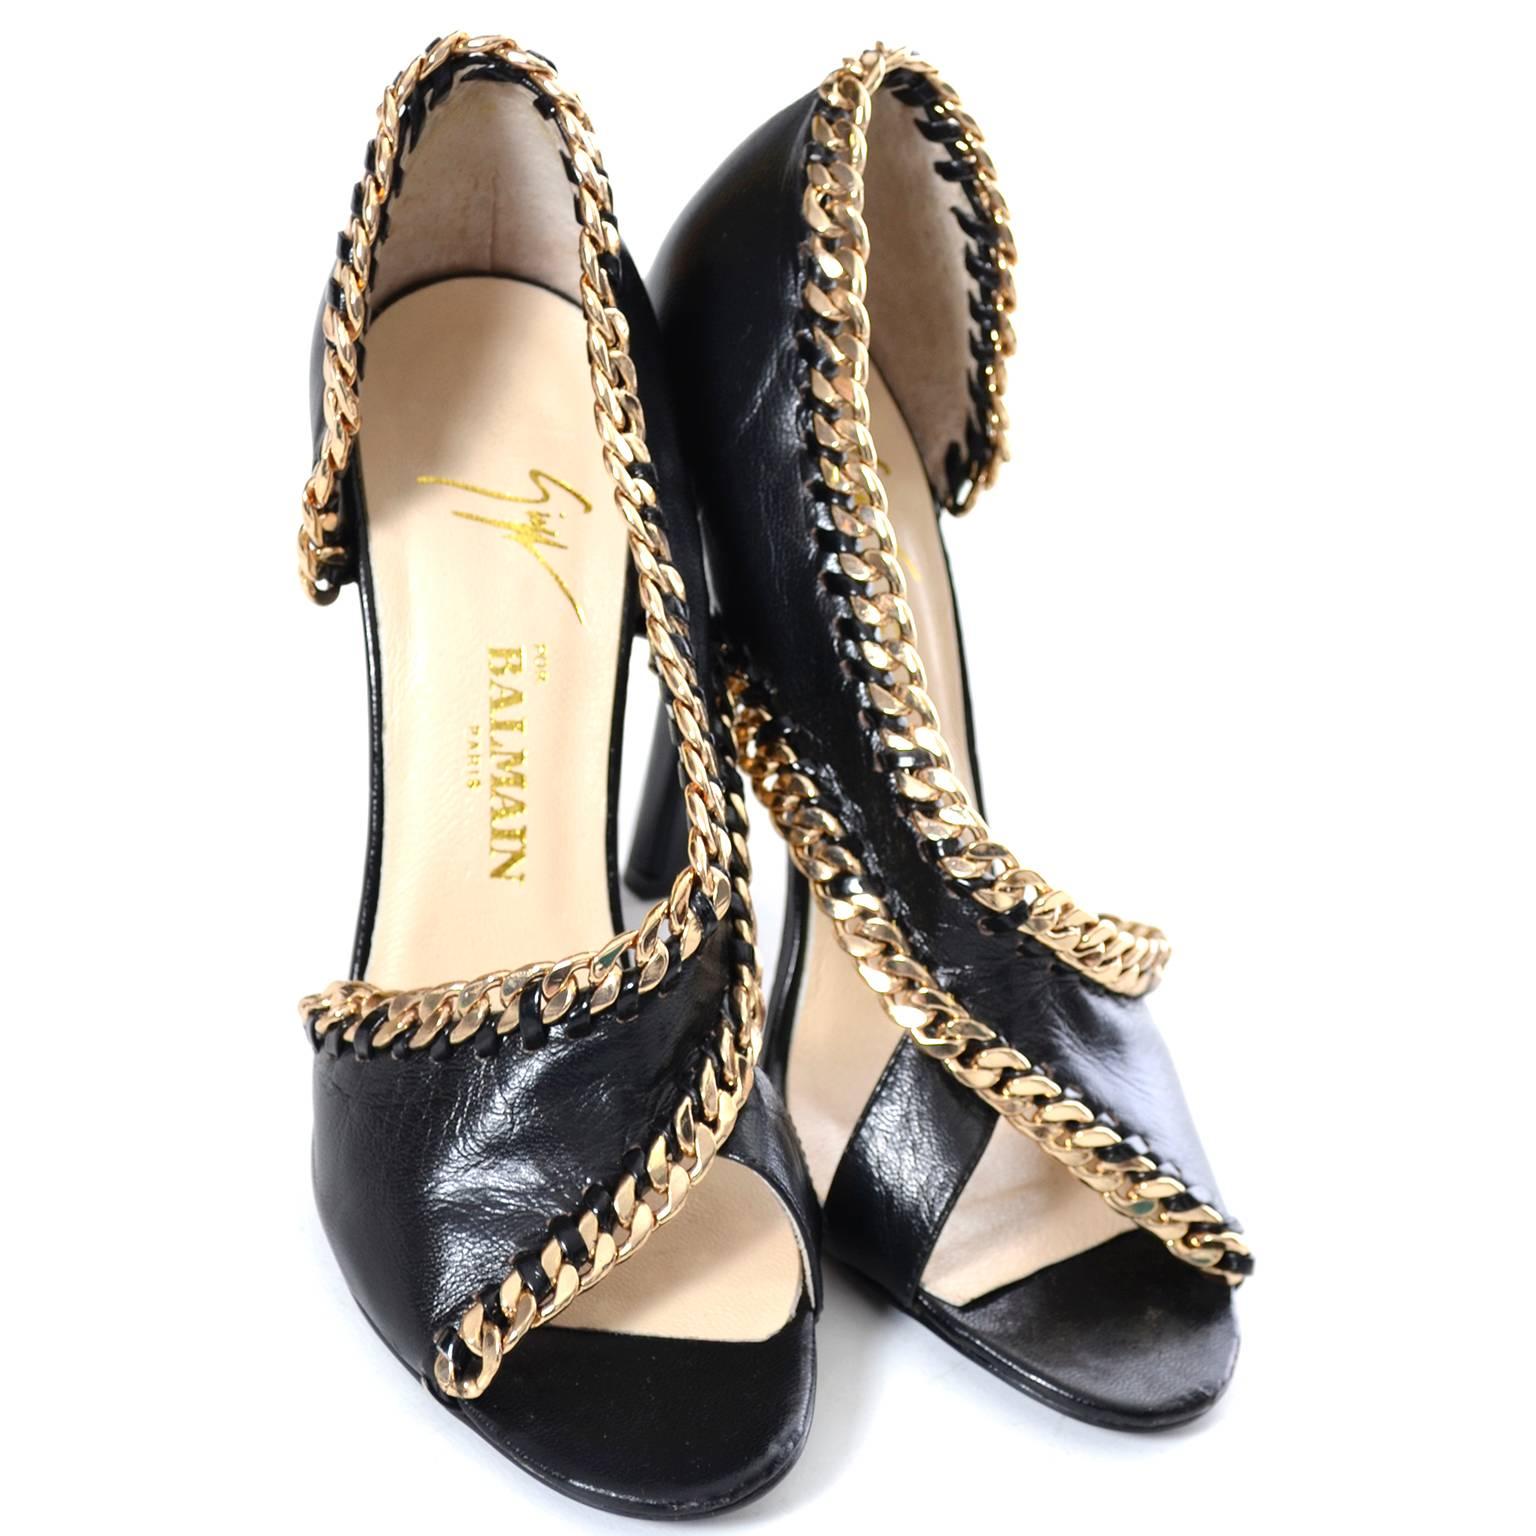 Giuseppe Zanotti for Balmain Paris Shoes Black Leather Heels Chain Detail 5.5 6 In Excellent Condition In Portland, OR